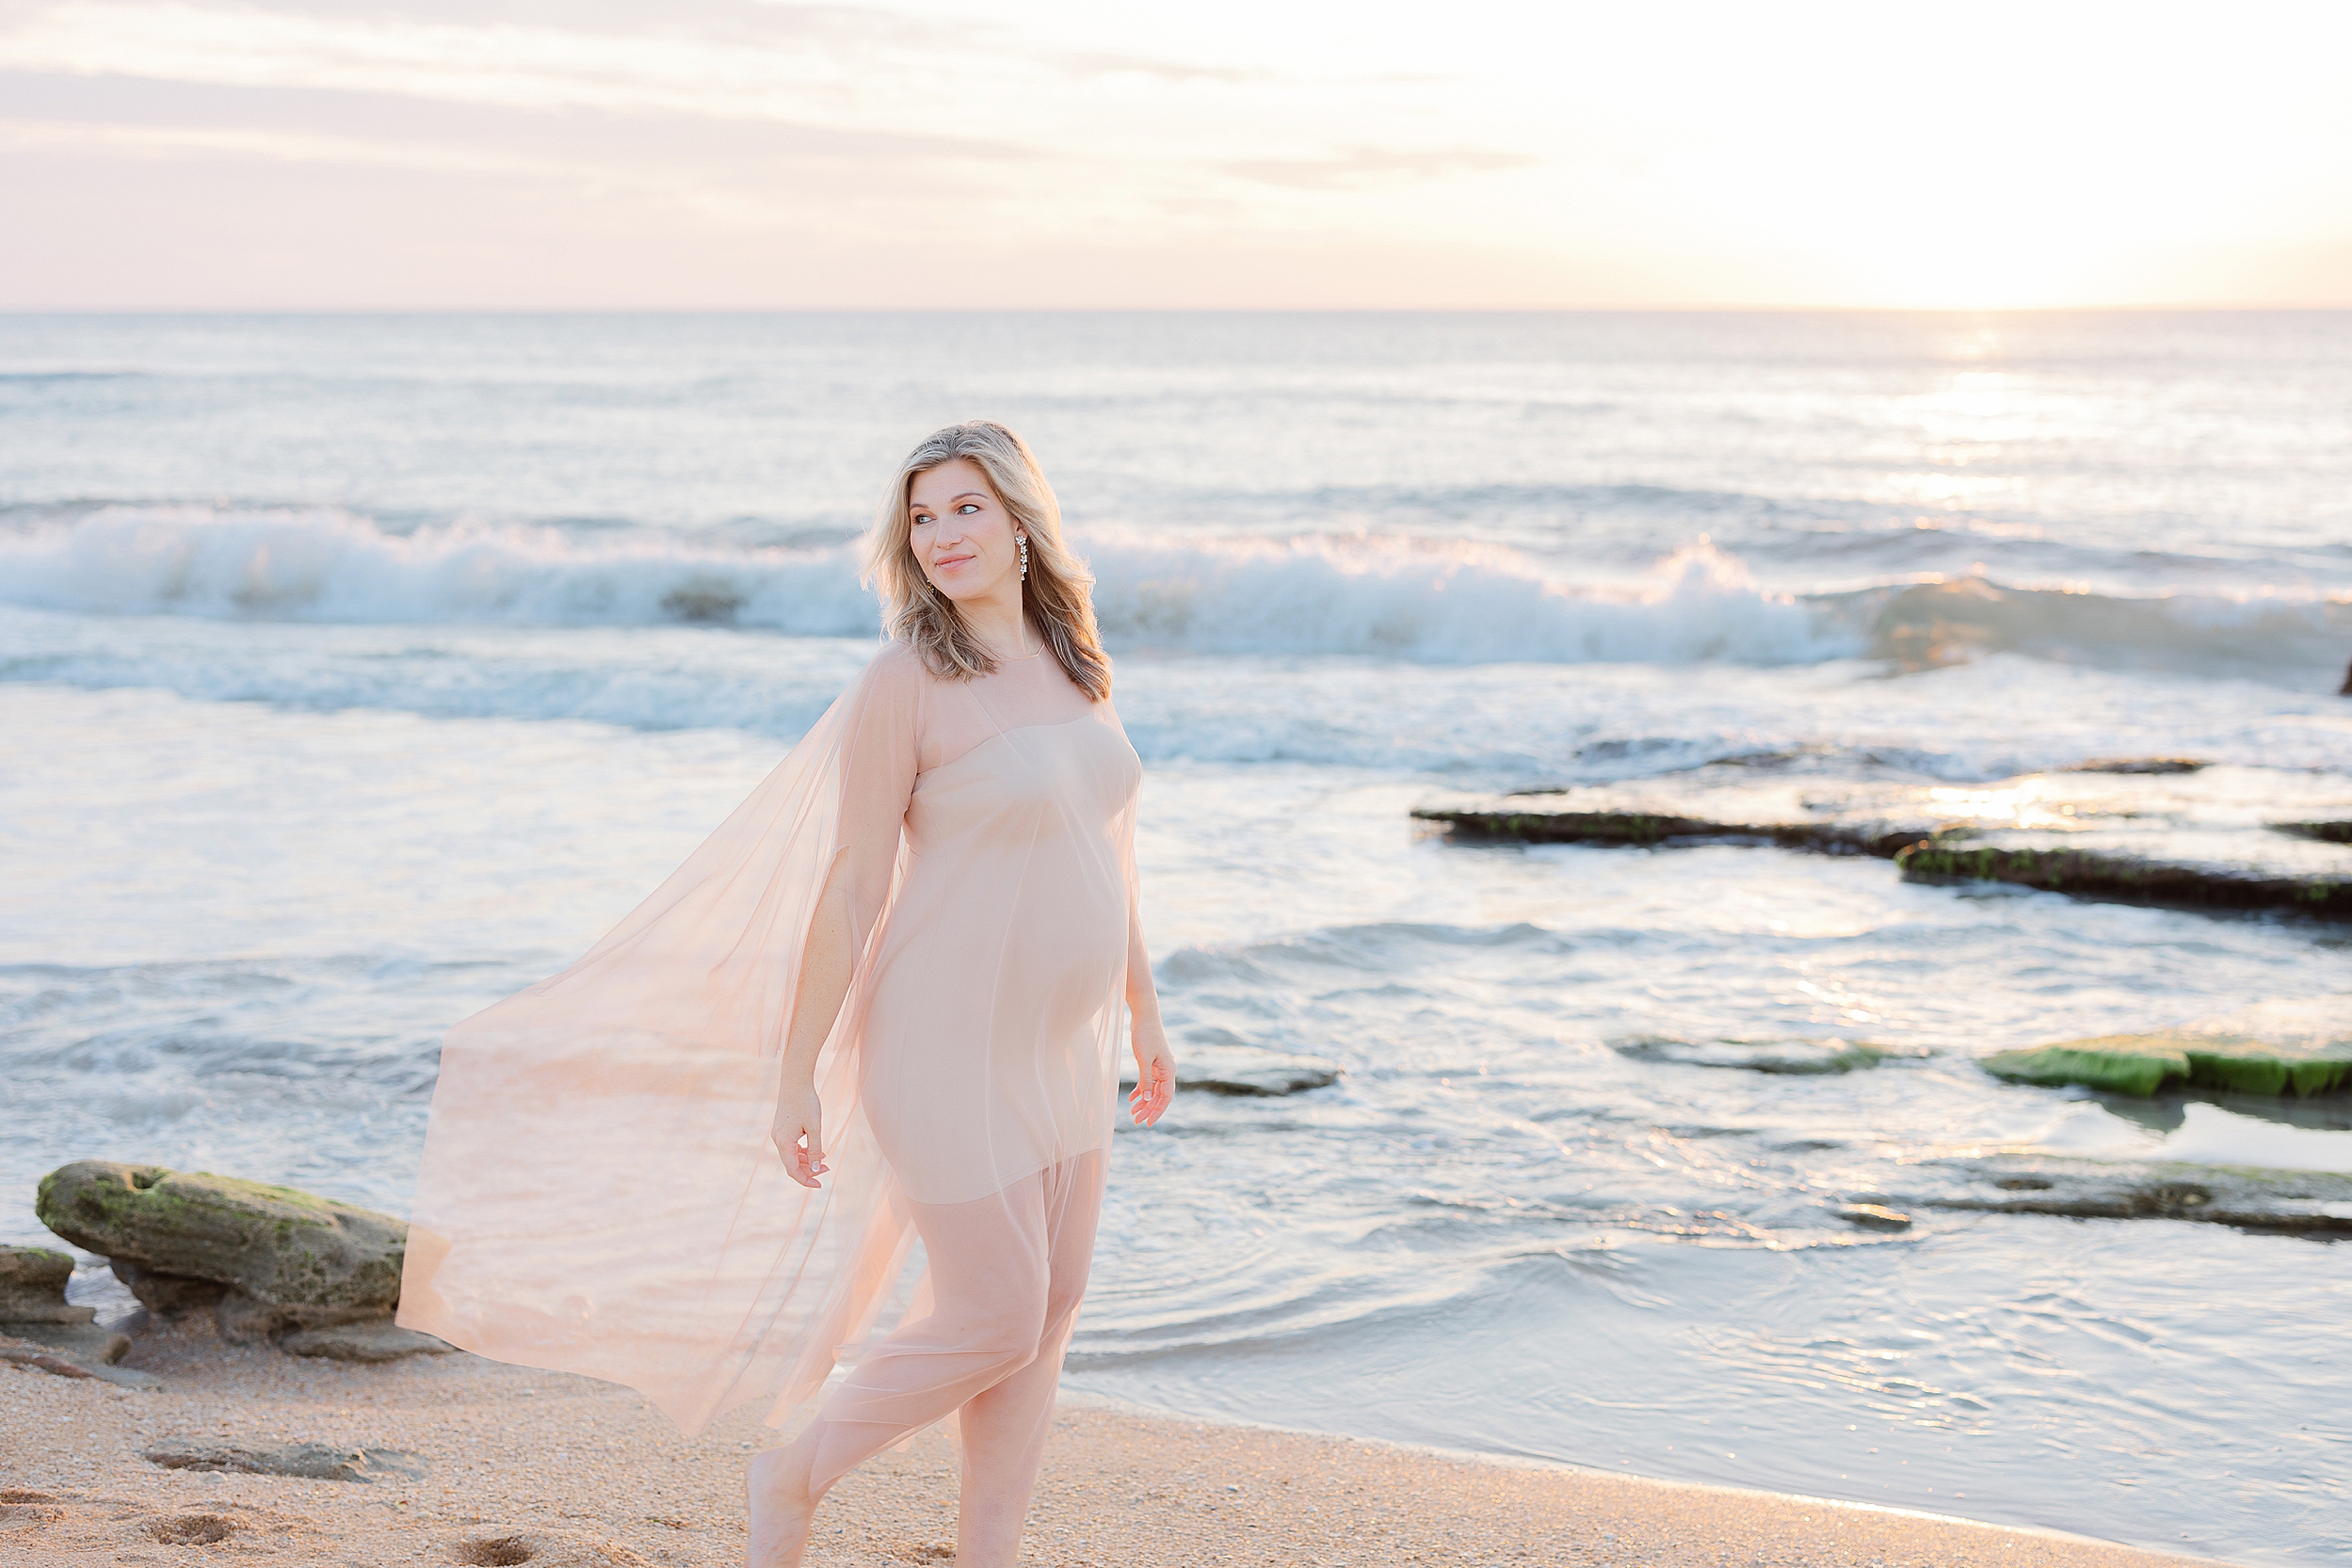 A dreamy coastal maternity portrait of a woman in nude tulle dress on the beach at sunrise.